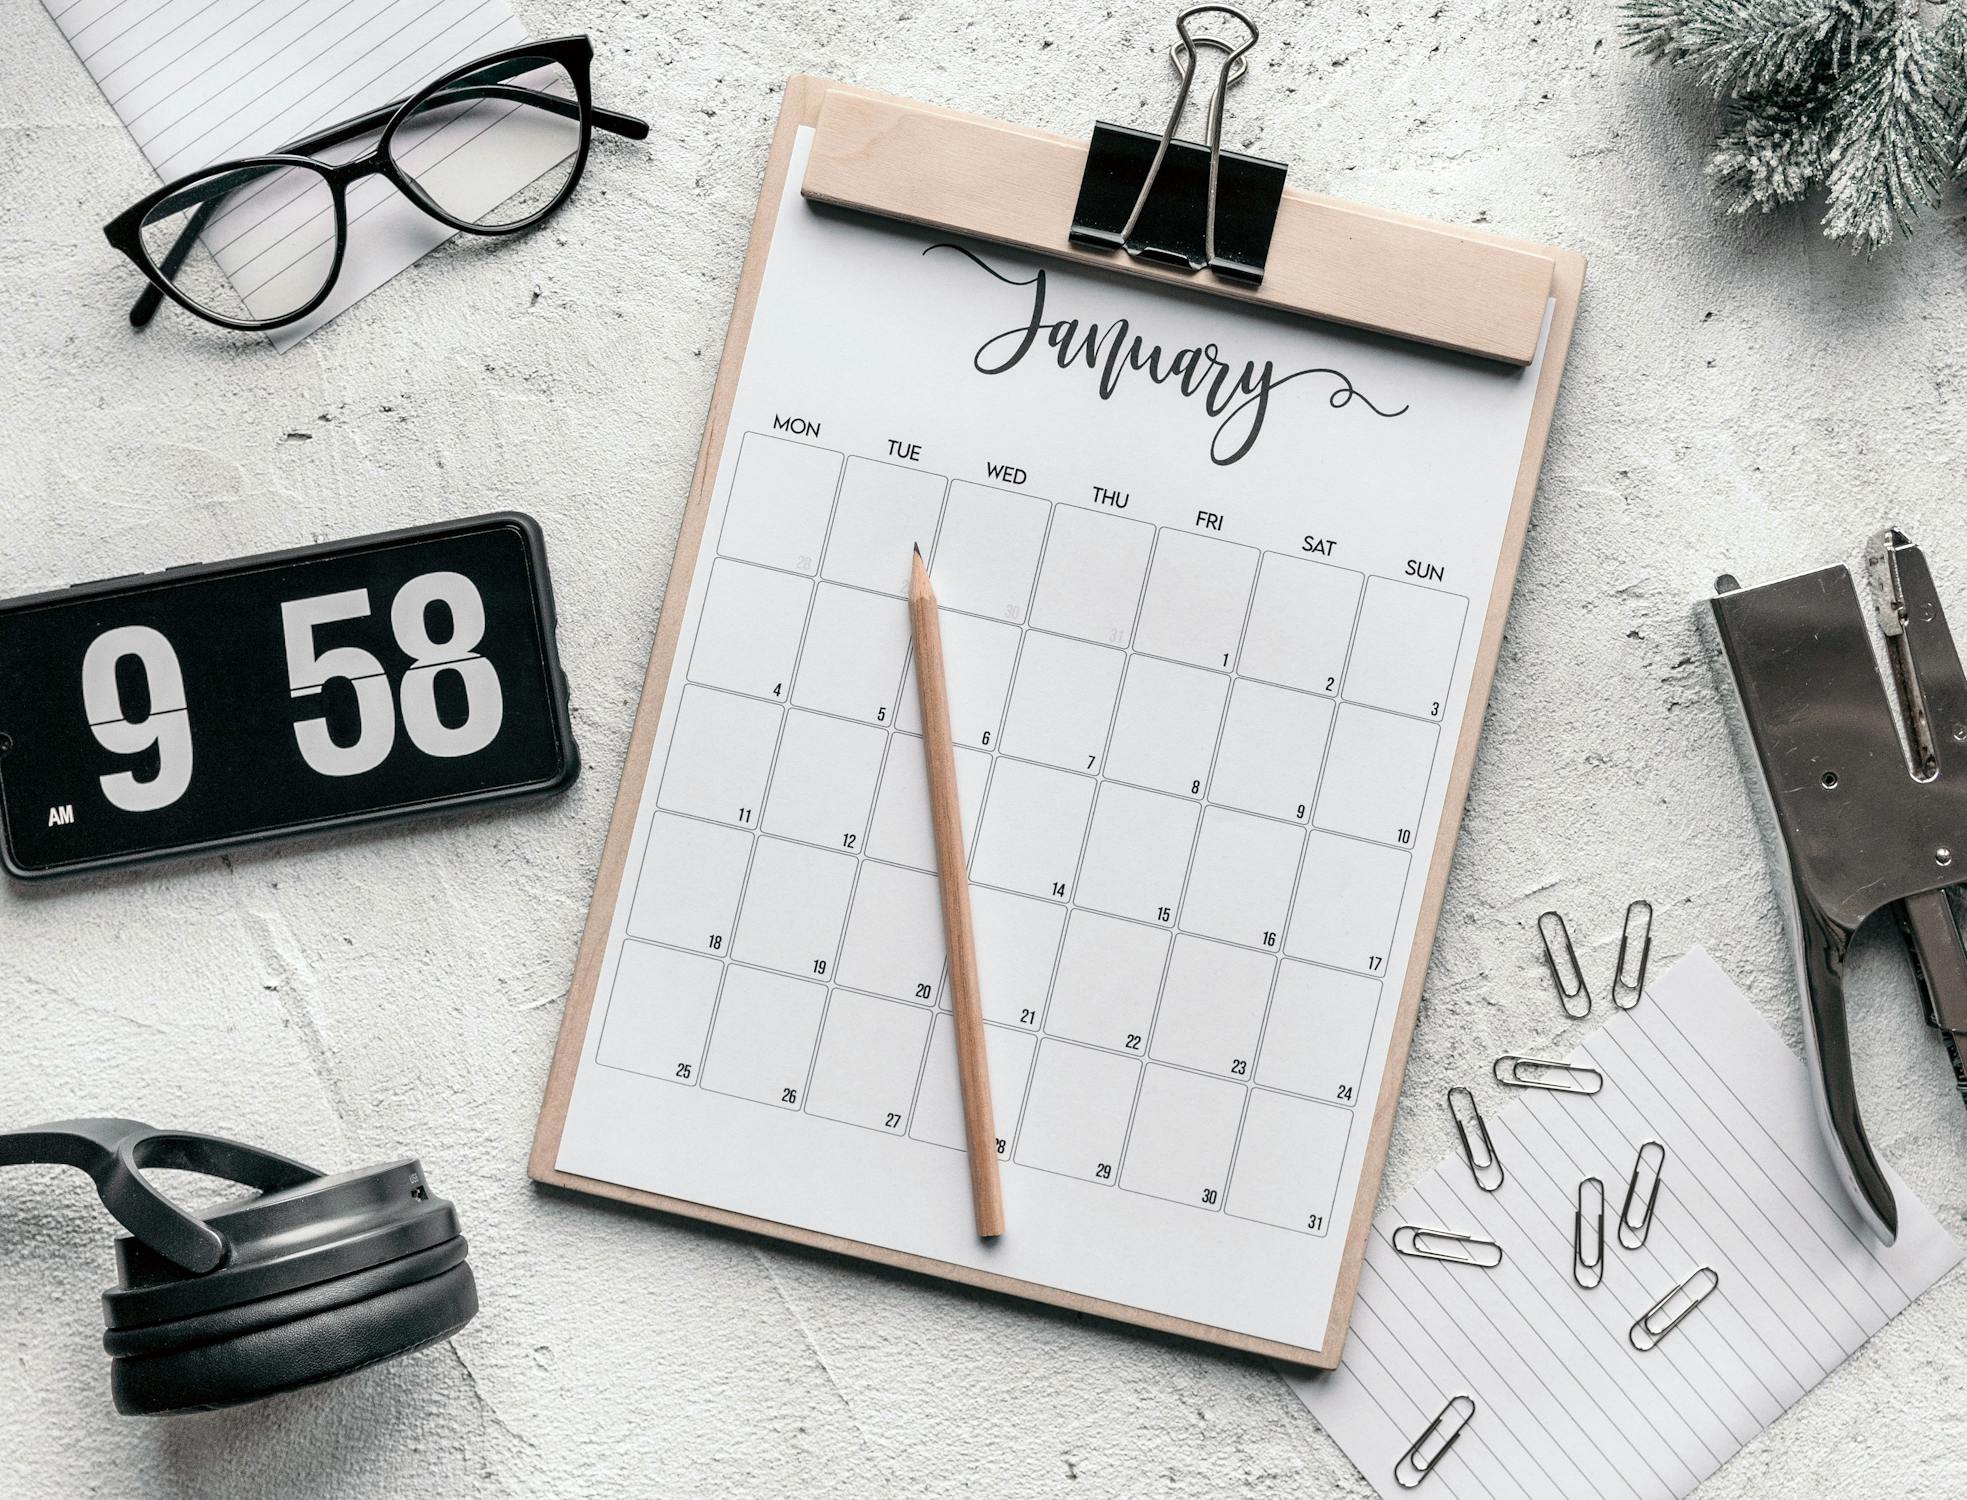 Clipboard with calendar placed on desk amidst stationery · Free Stock Photo